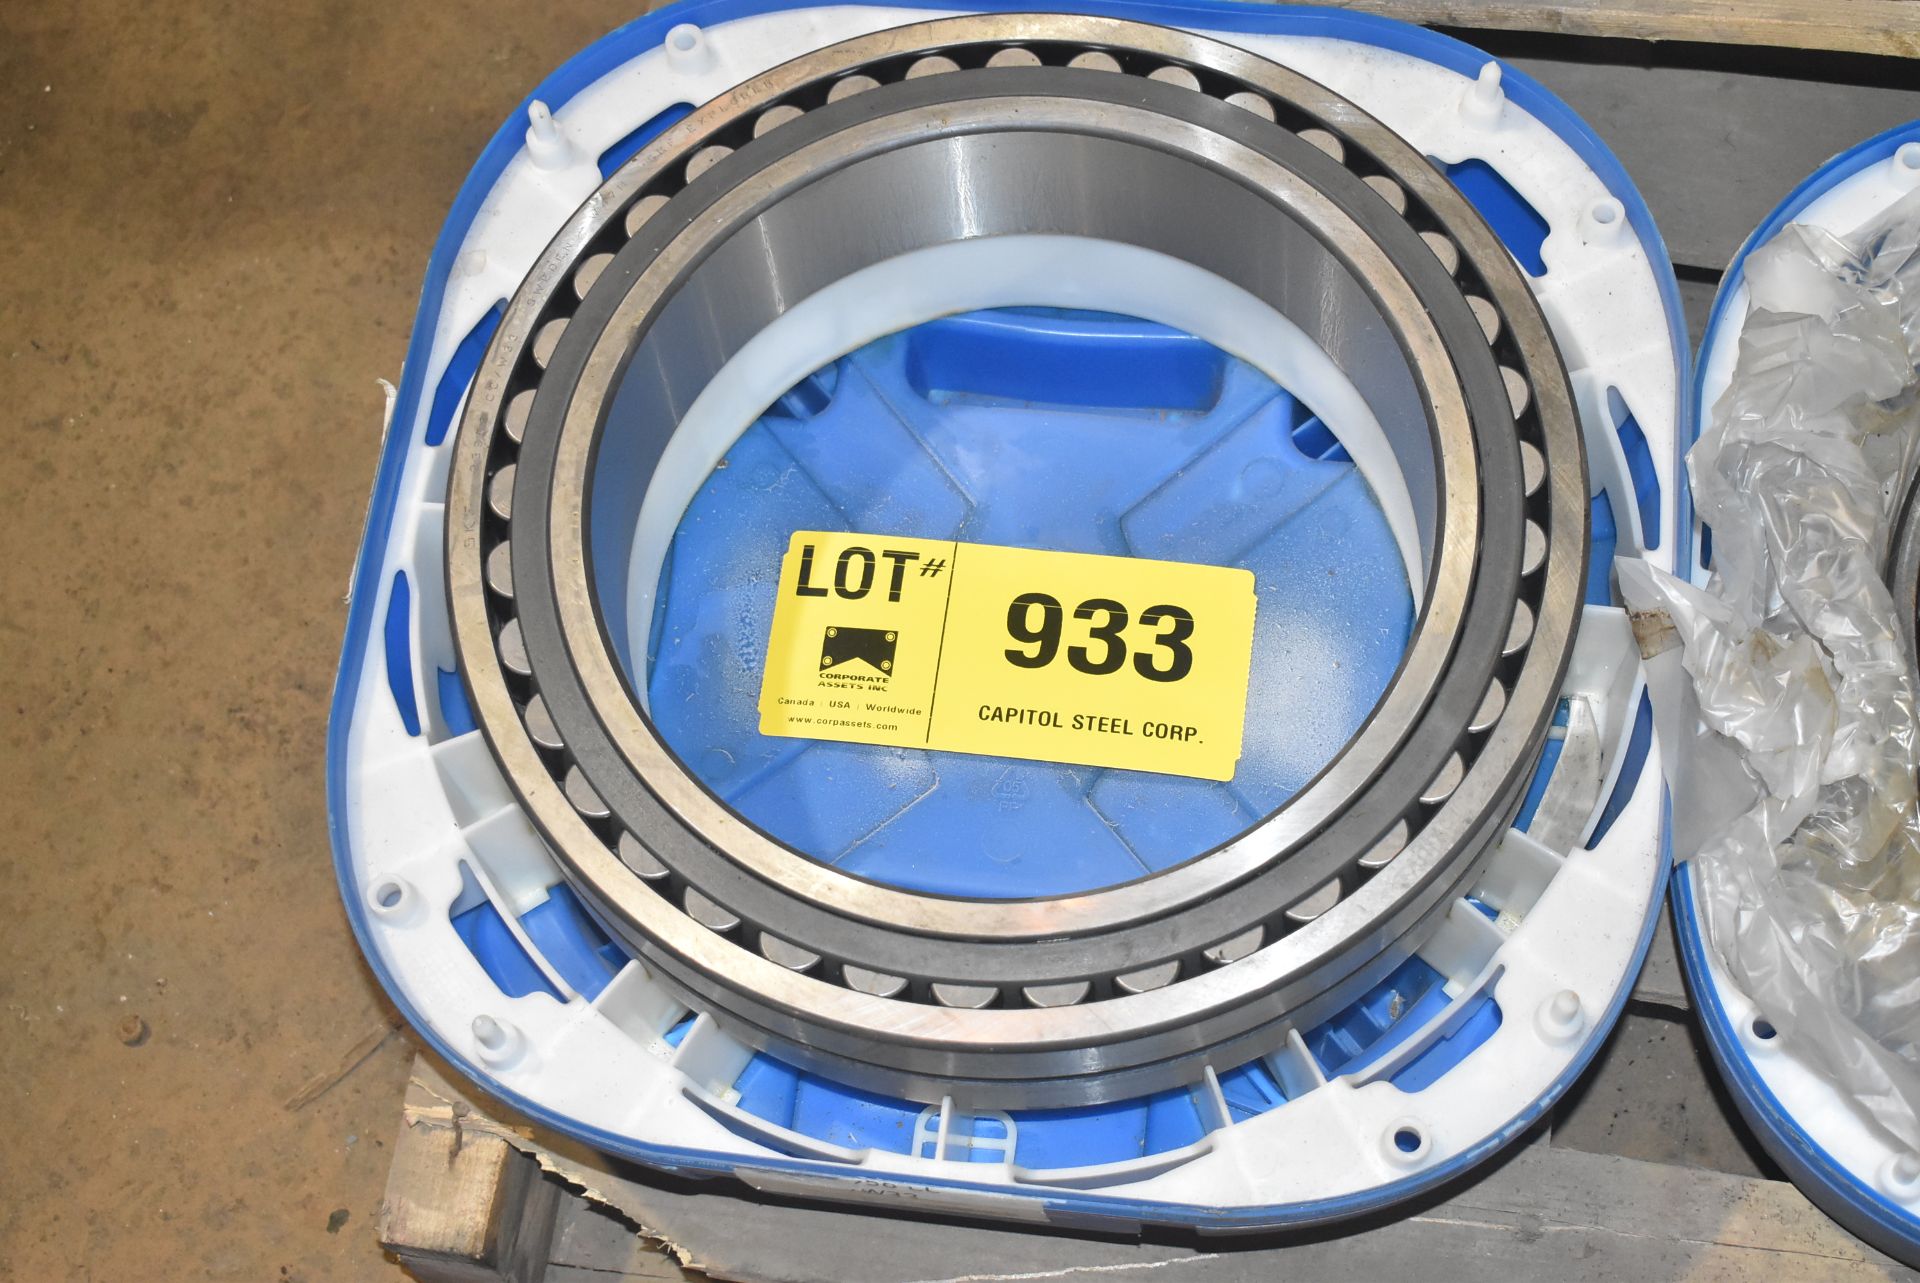 SKF 23956 CC/W33 SPHERICAL ROLLER BEARING [RIGGING FEES FOR LOT #933 - $30 USD PLUS APPLICABLE